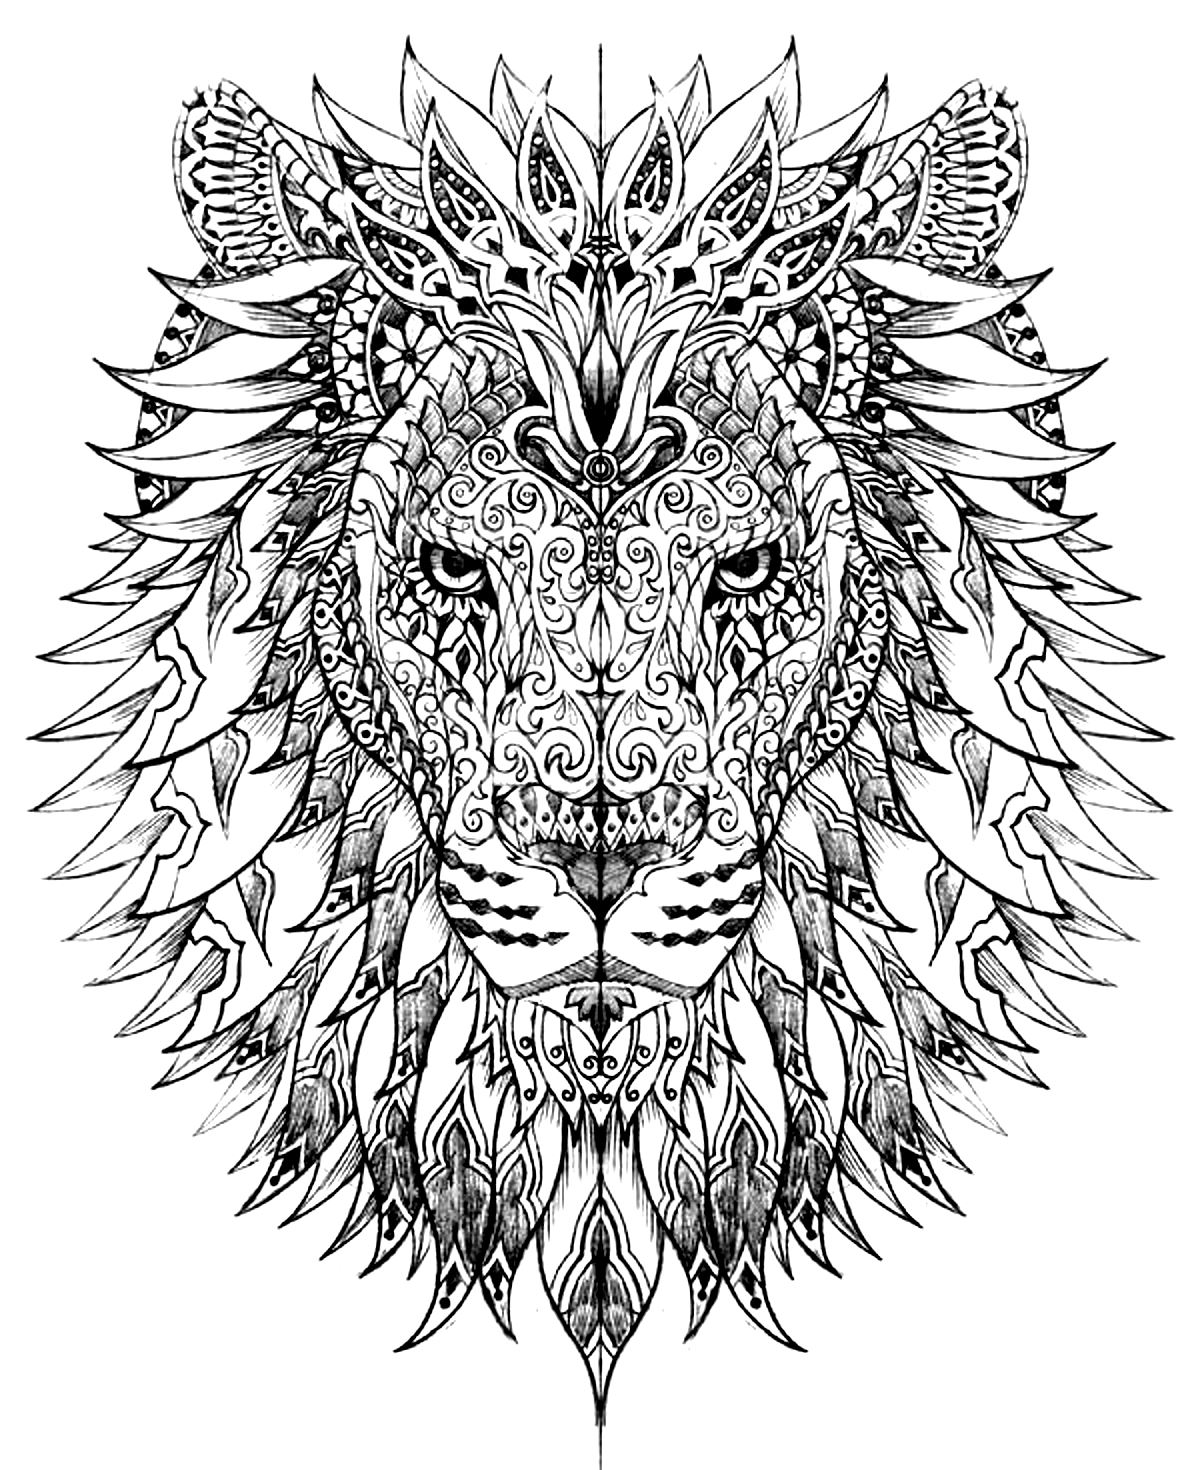 Lion head drawn with very smart and harmonious patterns